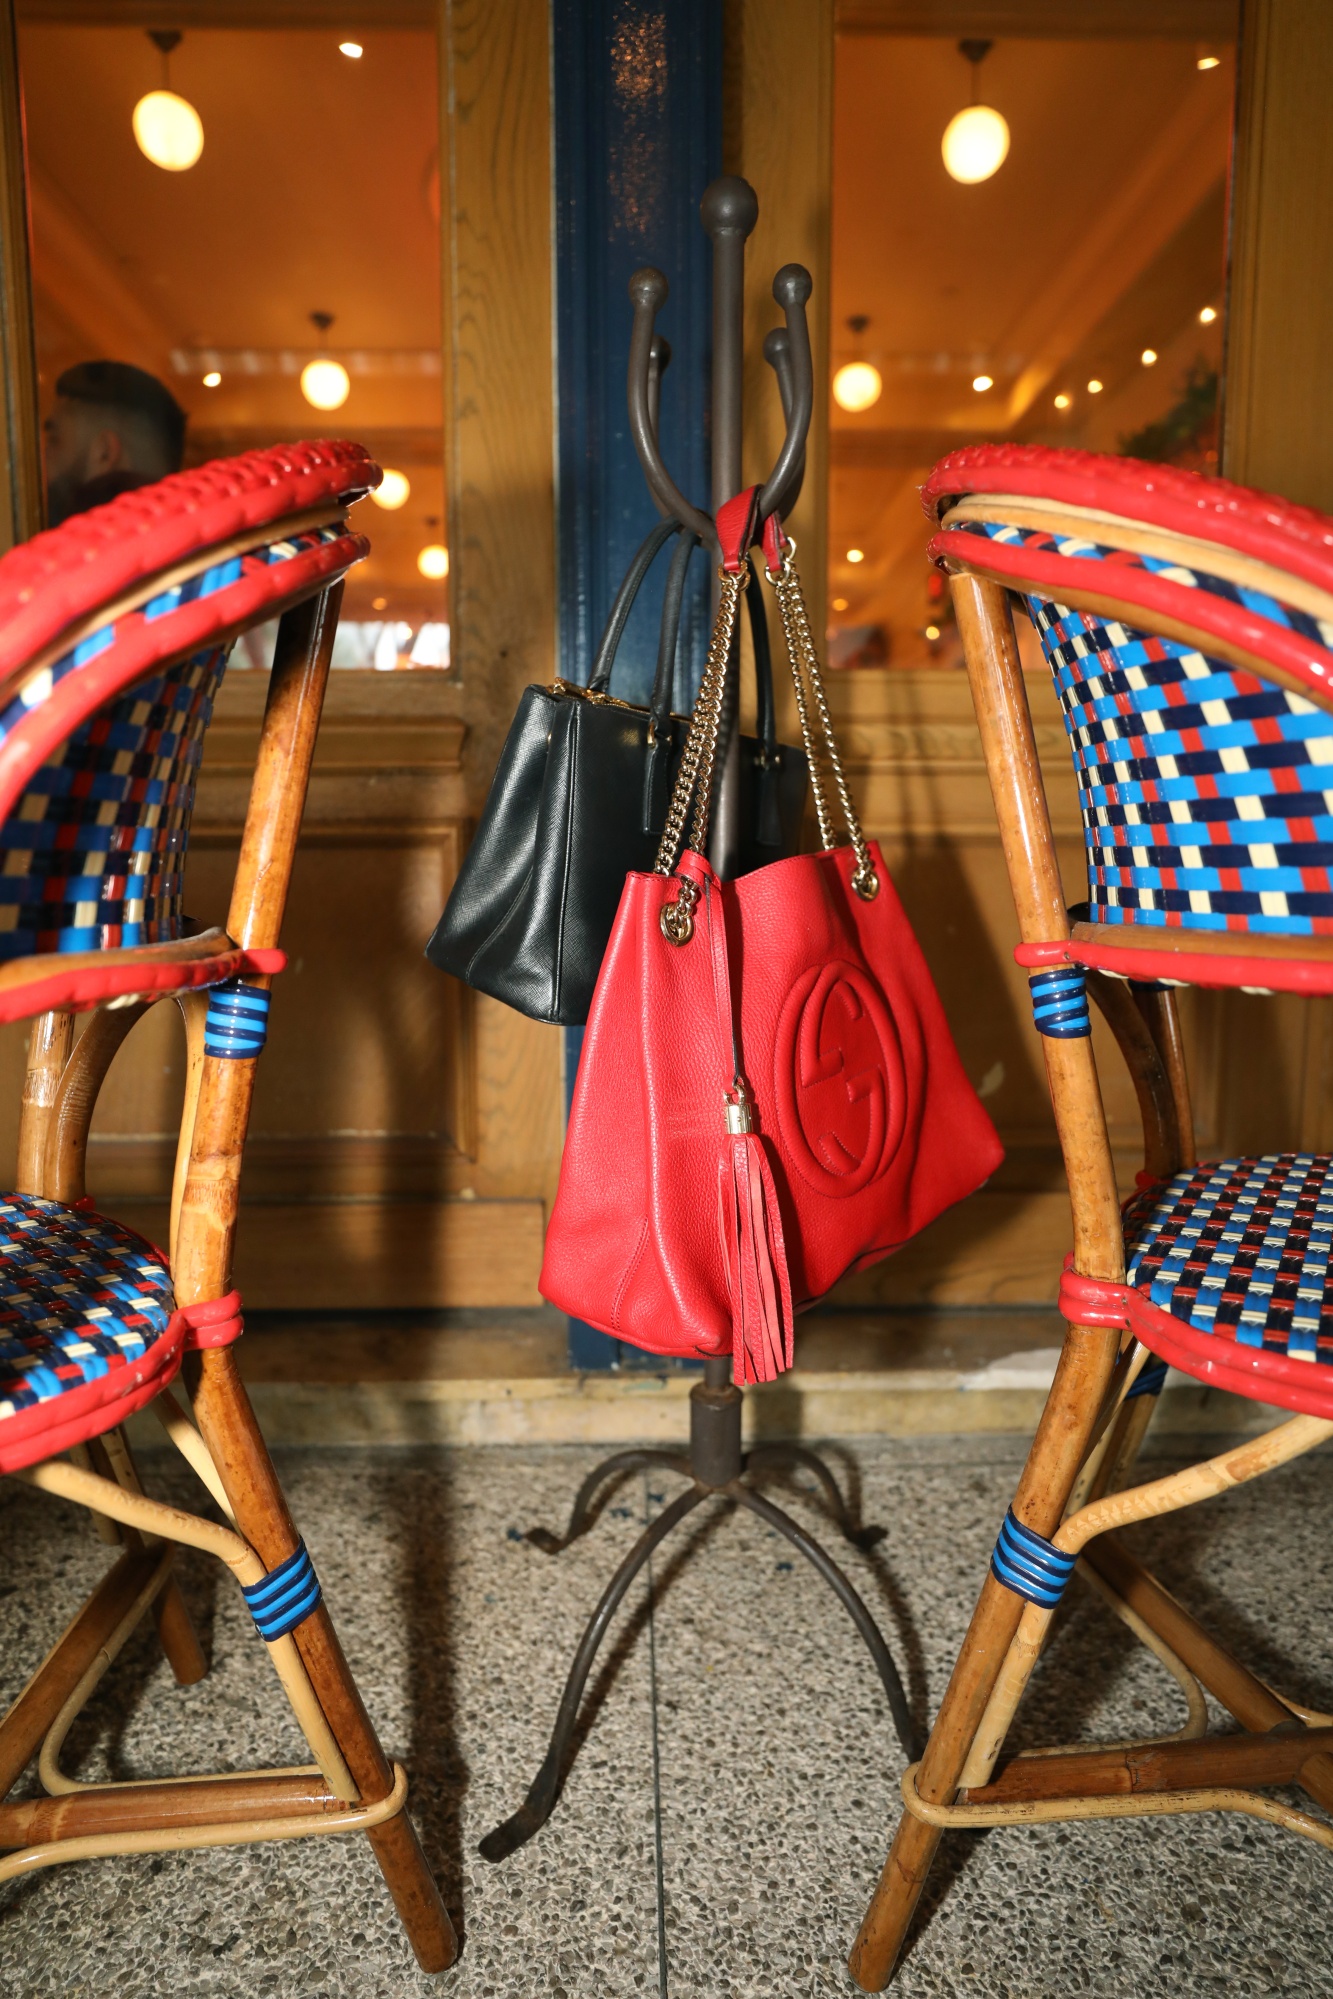 Luxury purse stools are grabbing more real estate in restaurants